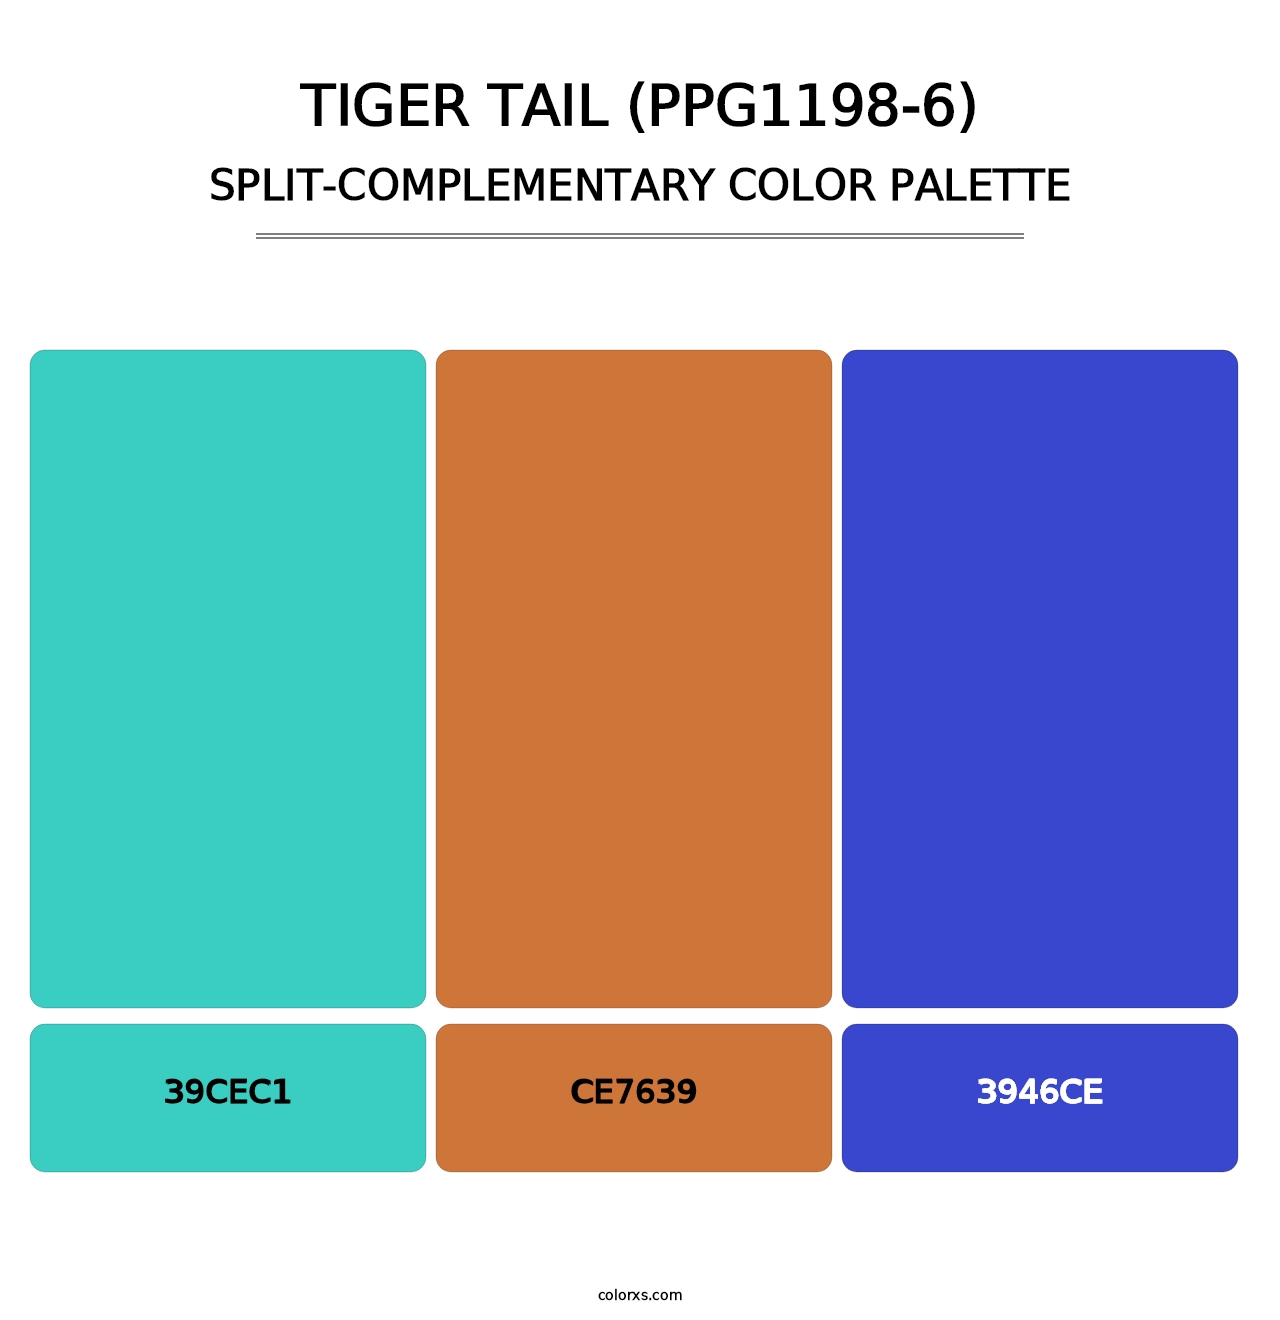 Tiger Tail (PPG1198-6) - Split-Complementary Color Palette